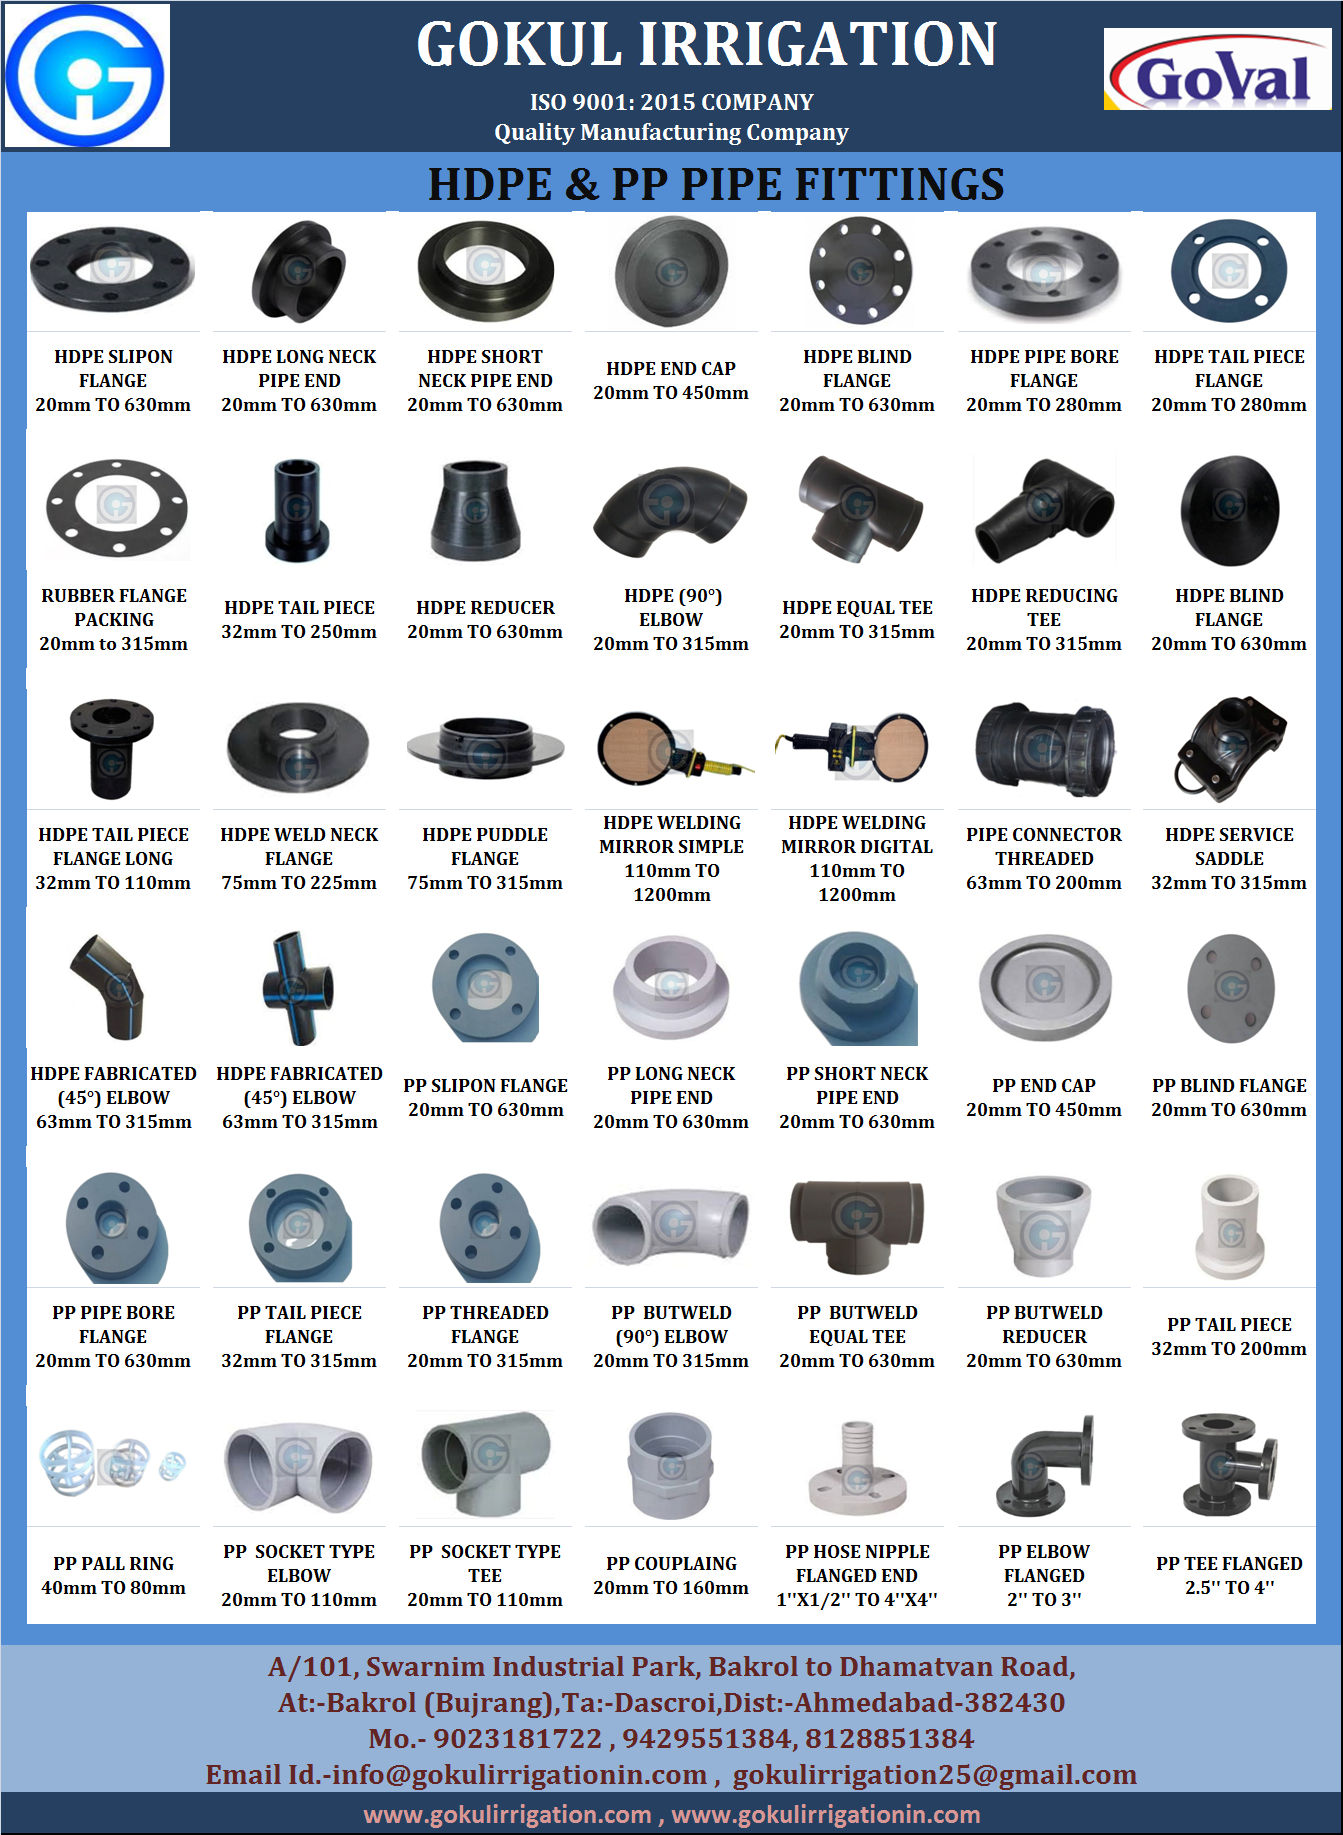 HDPE ELECTROFUSION FITTINGS